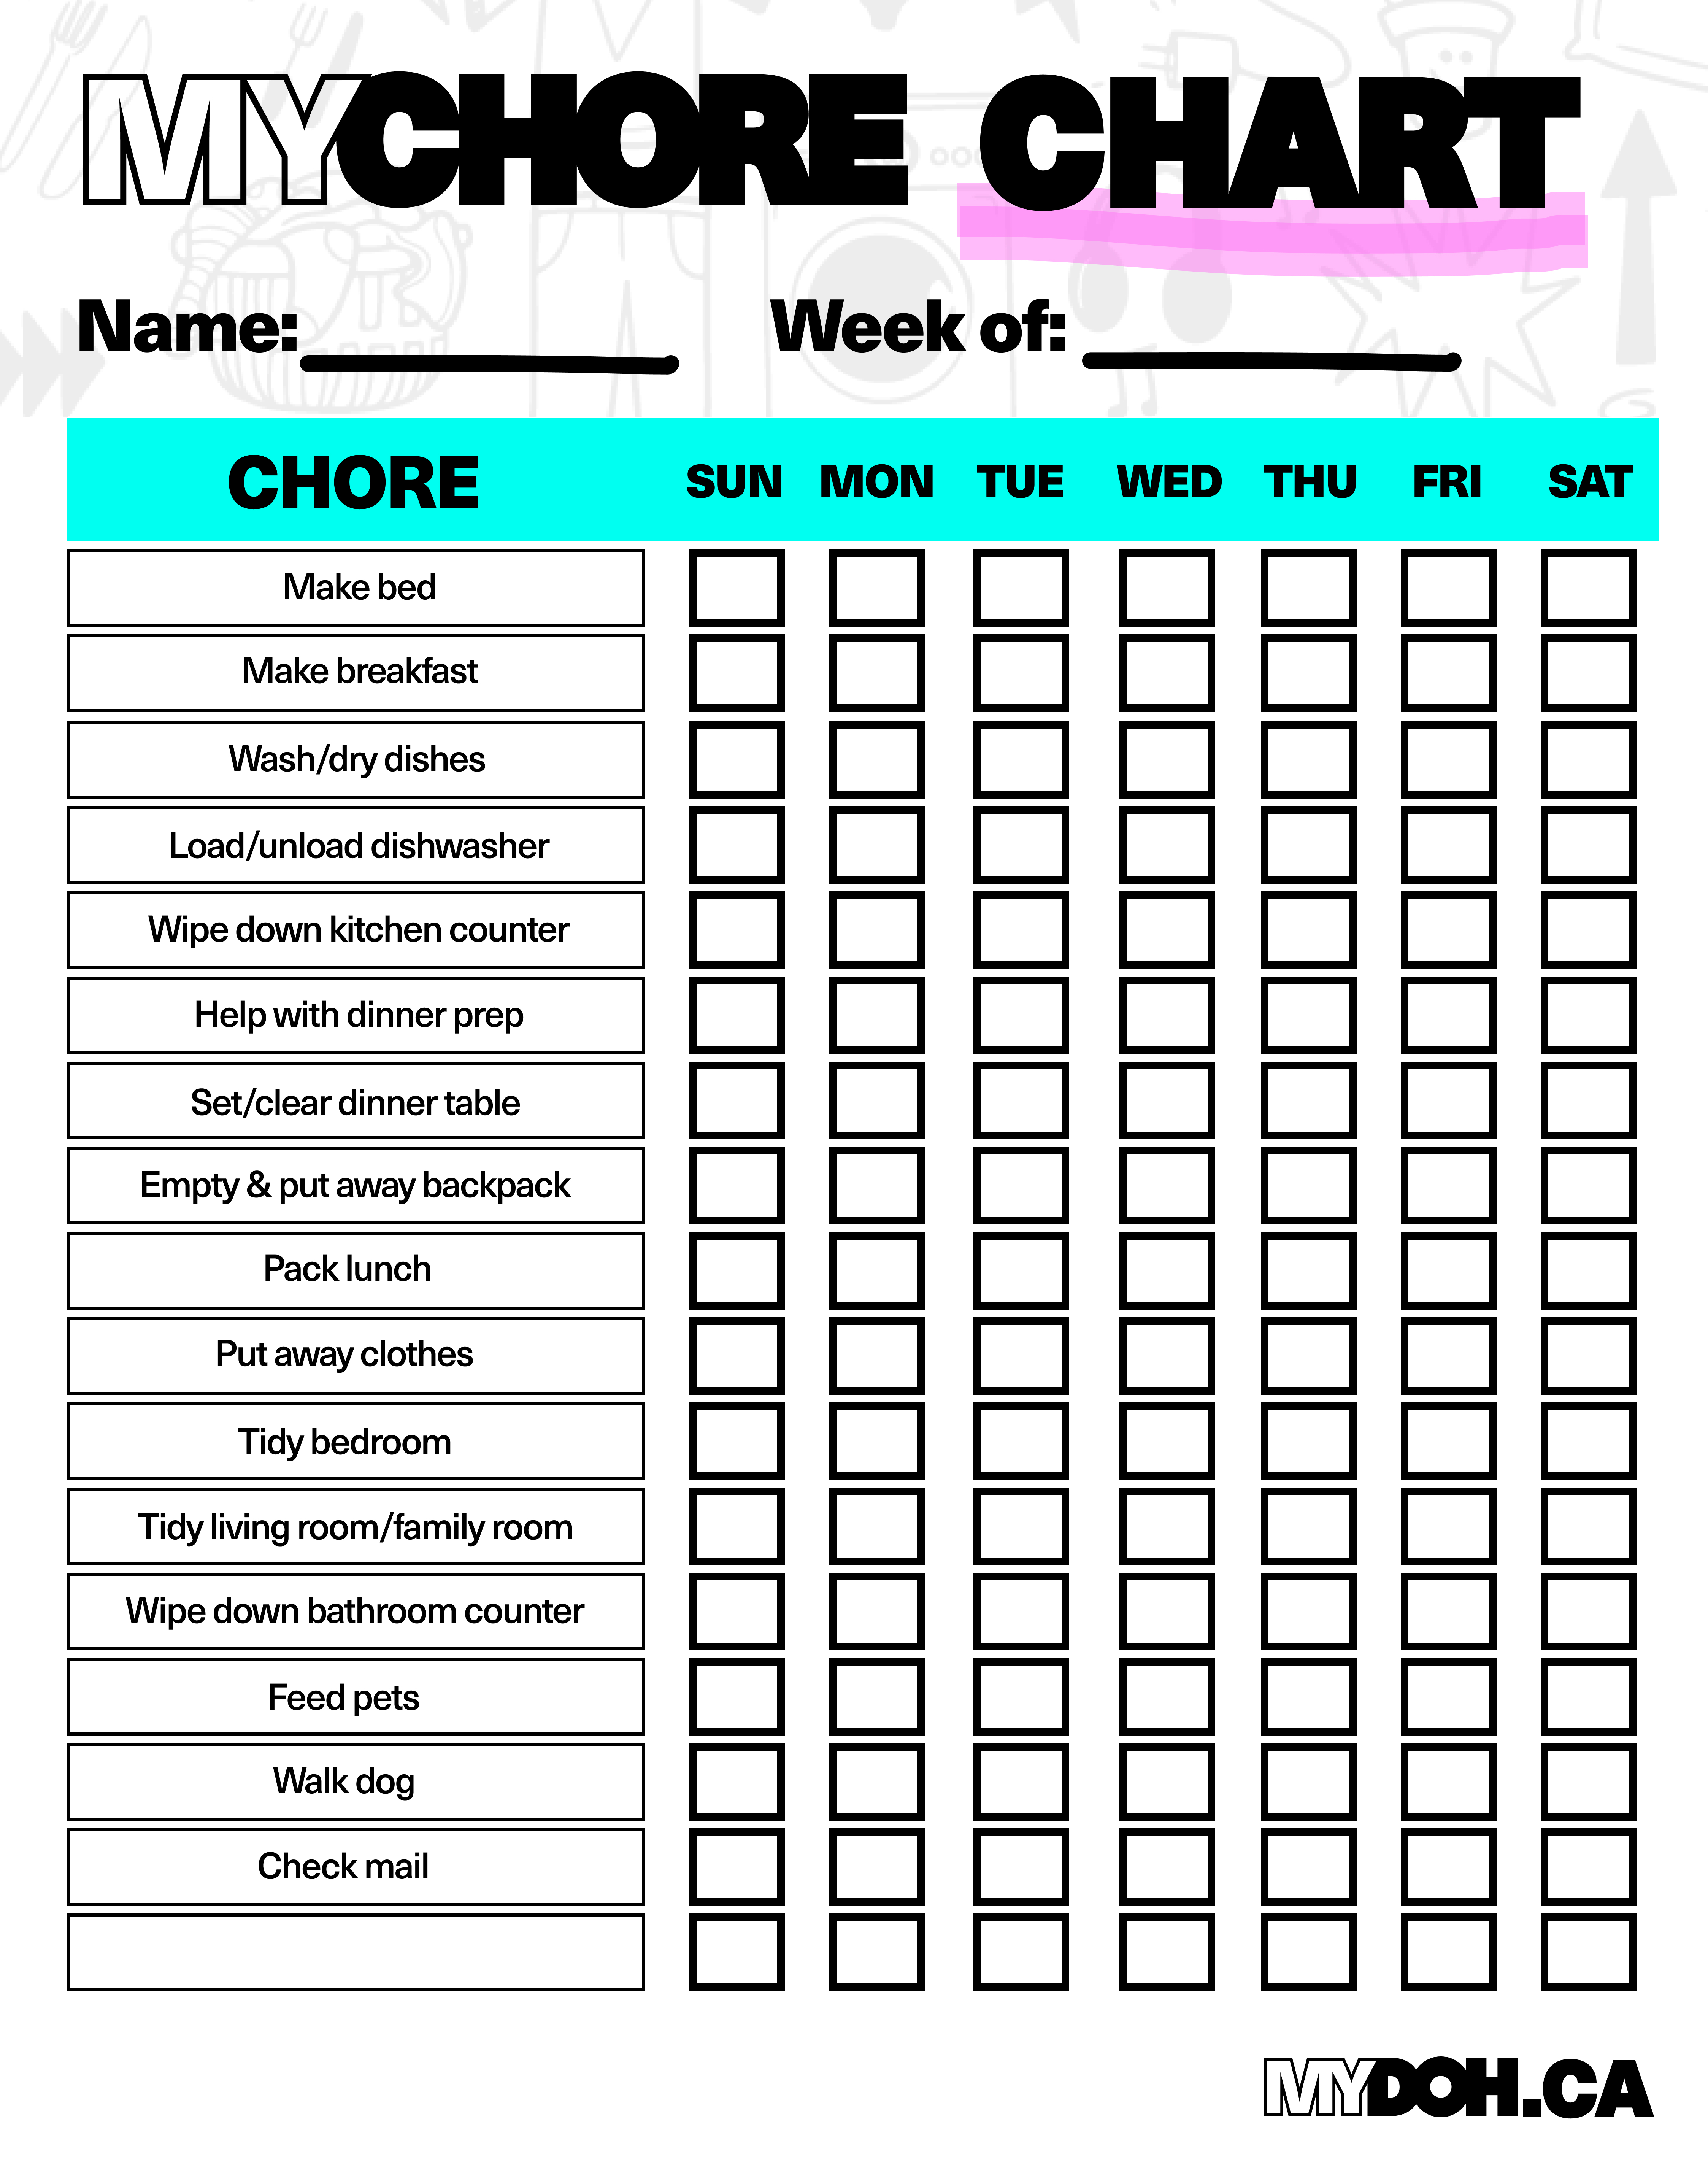 kids-chore-chart-family-task-lists-kids-to-do-and-done-family-schedule-jobs-office-supplies